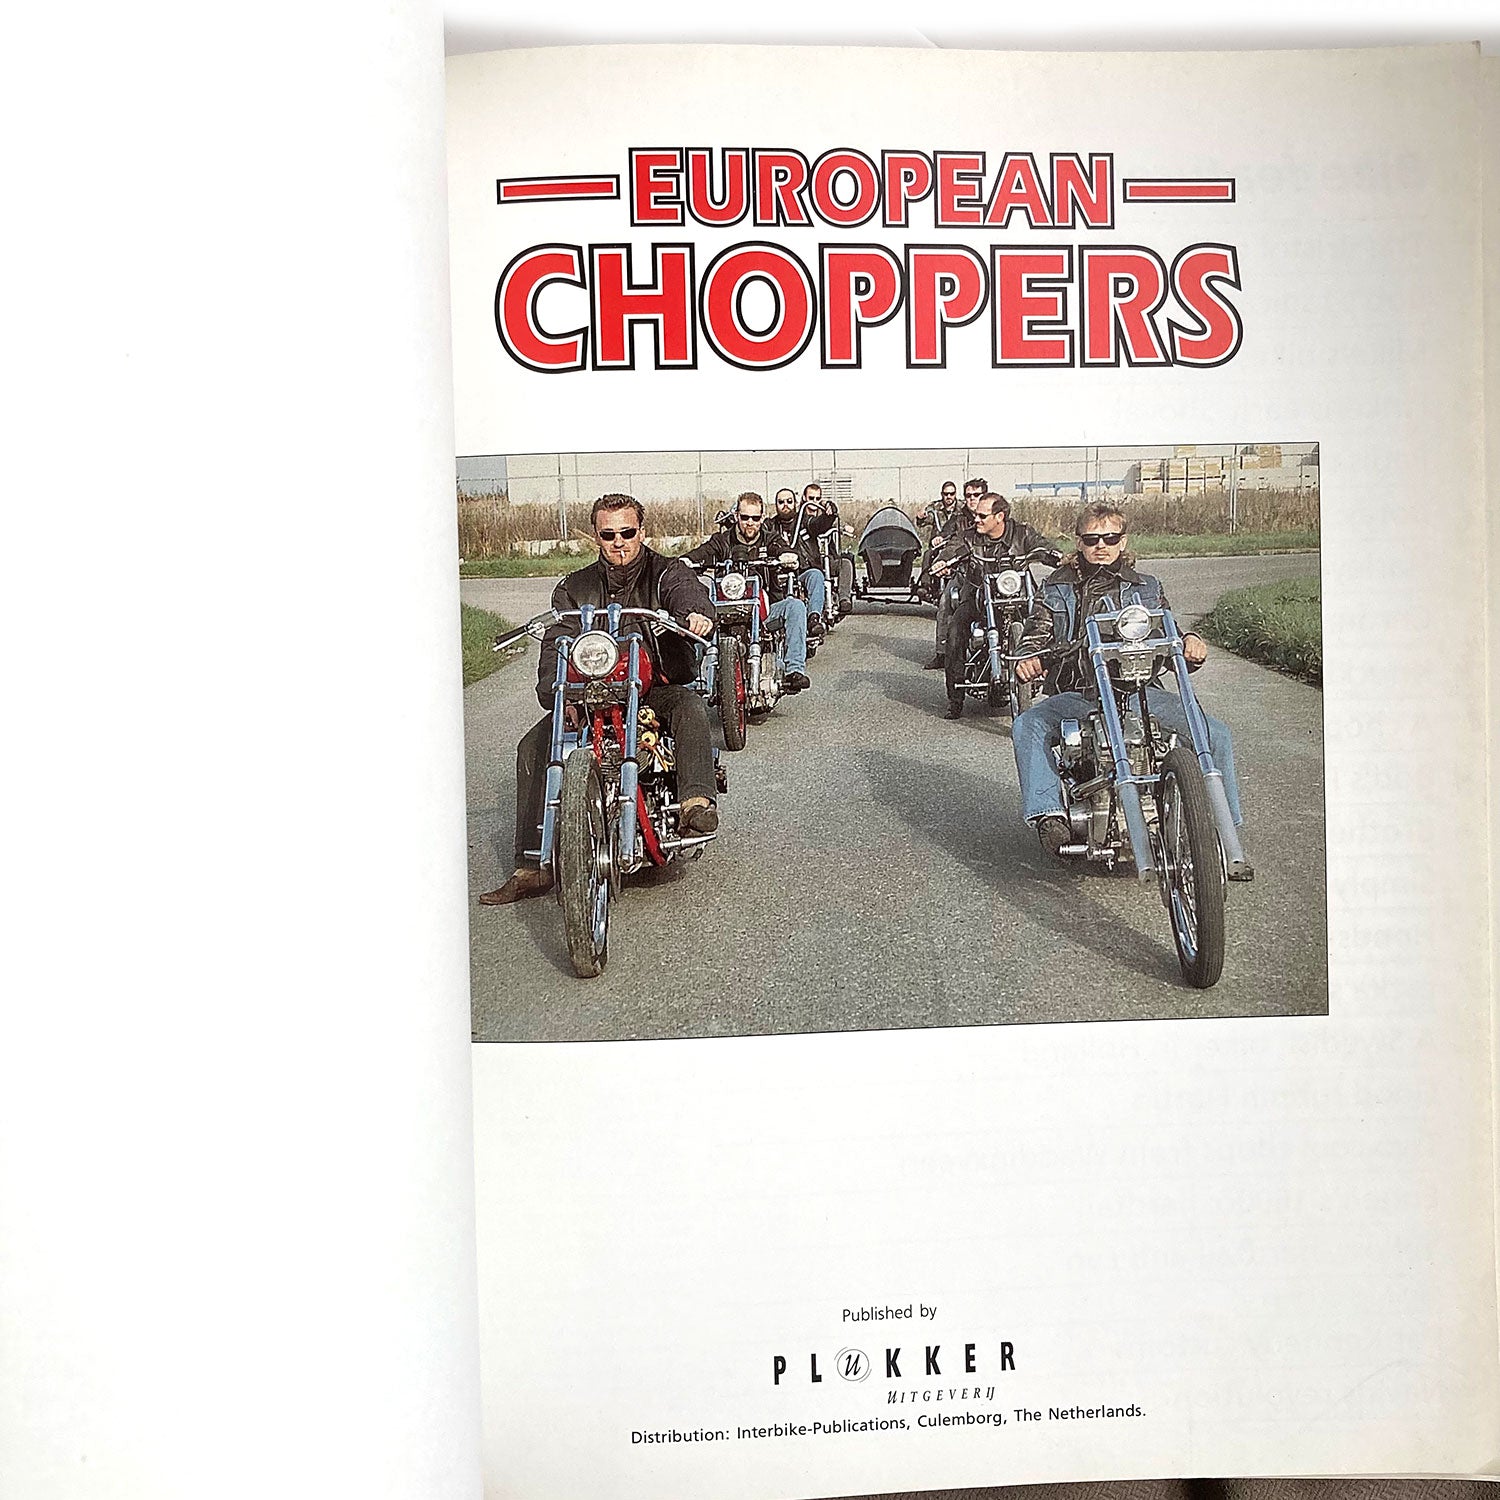 European Choppers soft cover book by T. Grizzly Beerepoot, 1993